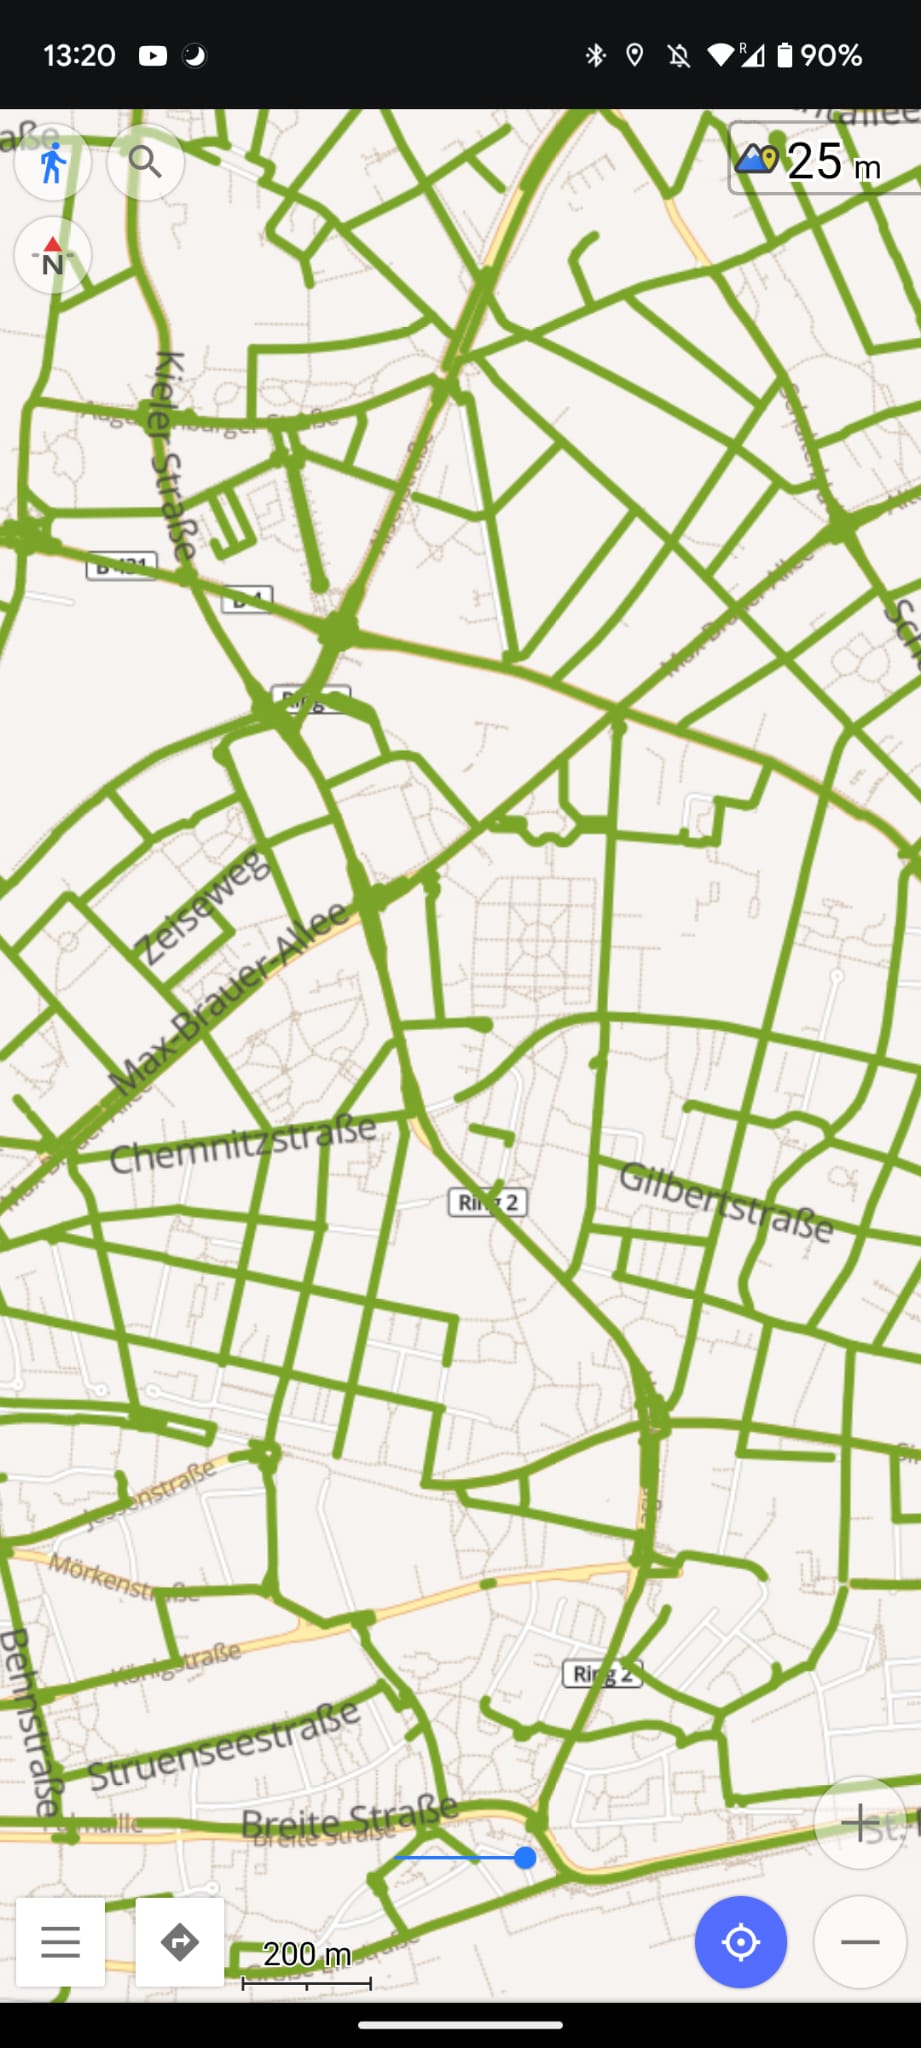 The map from before with an overlay of all the street segments that I've already walked